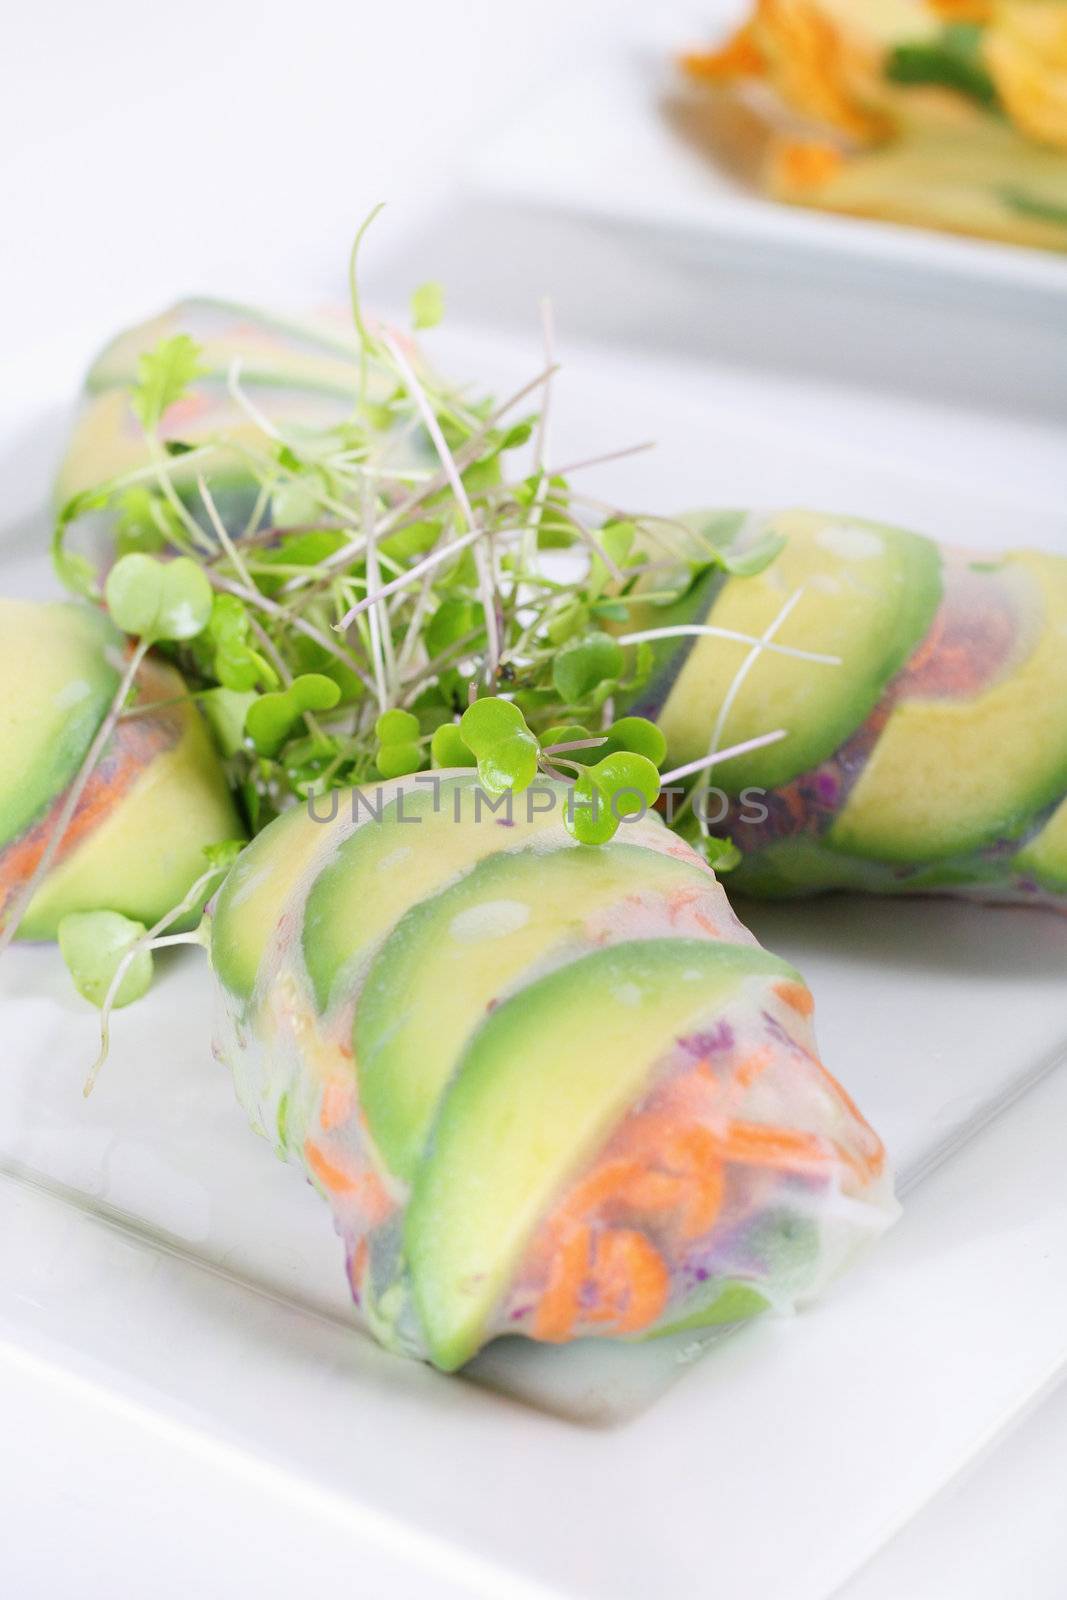 shot of spring roll wrapper with microgreens vertical by creativestock